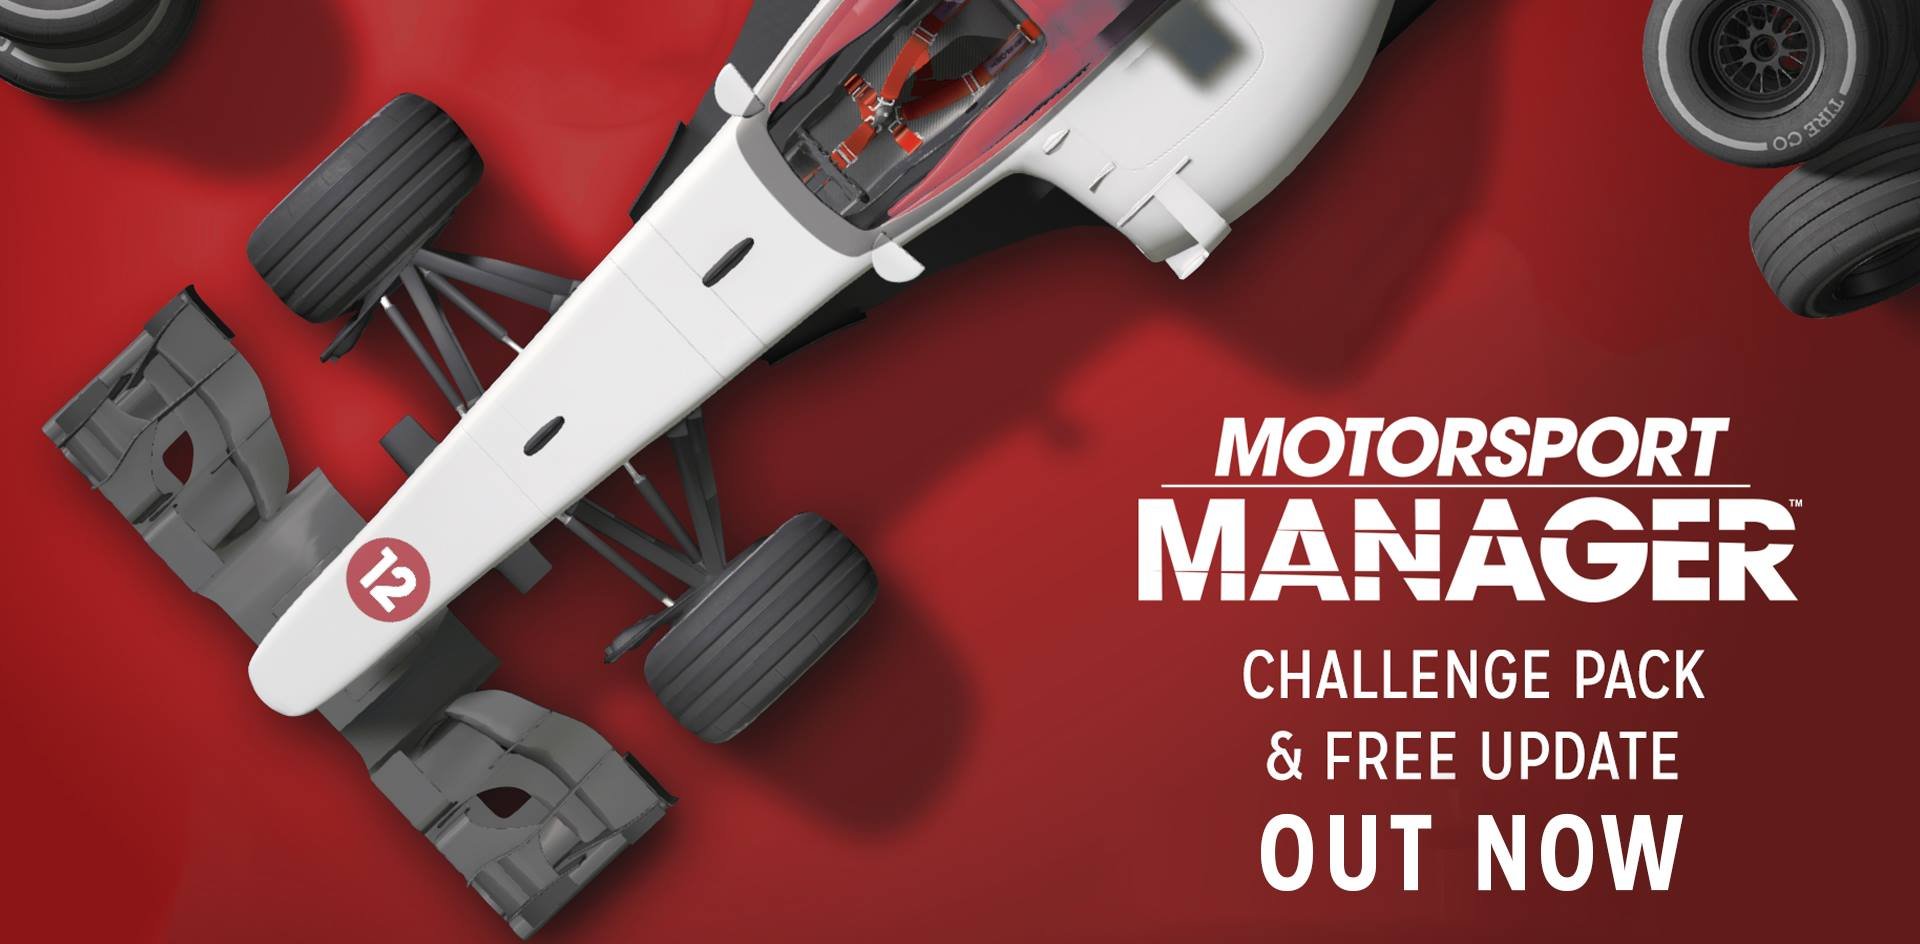 More information about "Motorsport Manager: nuovo DLC ed update disponibili"